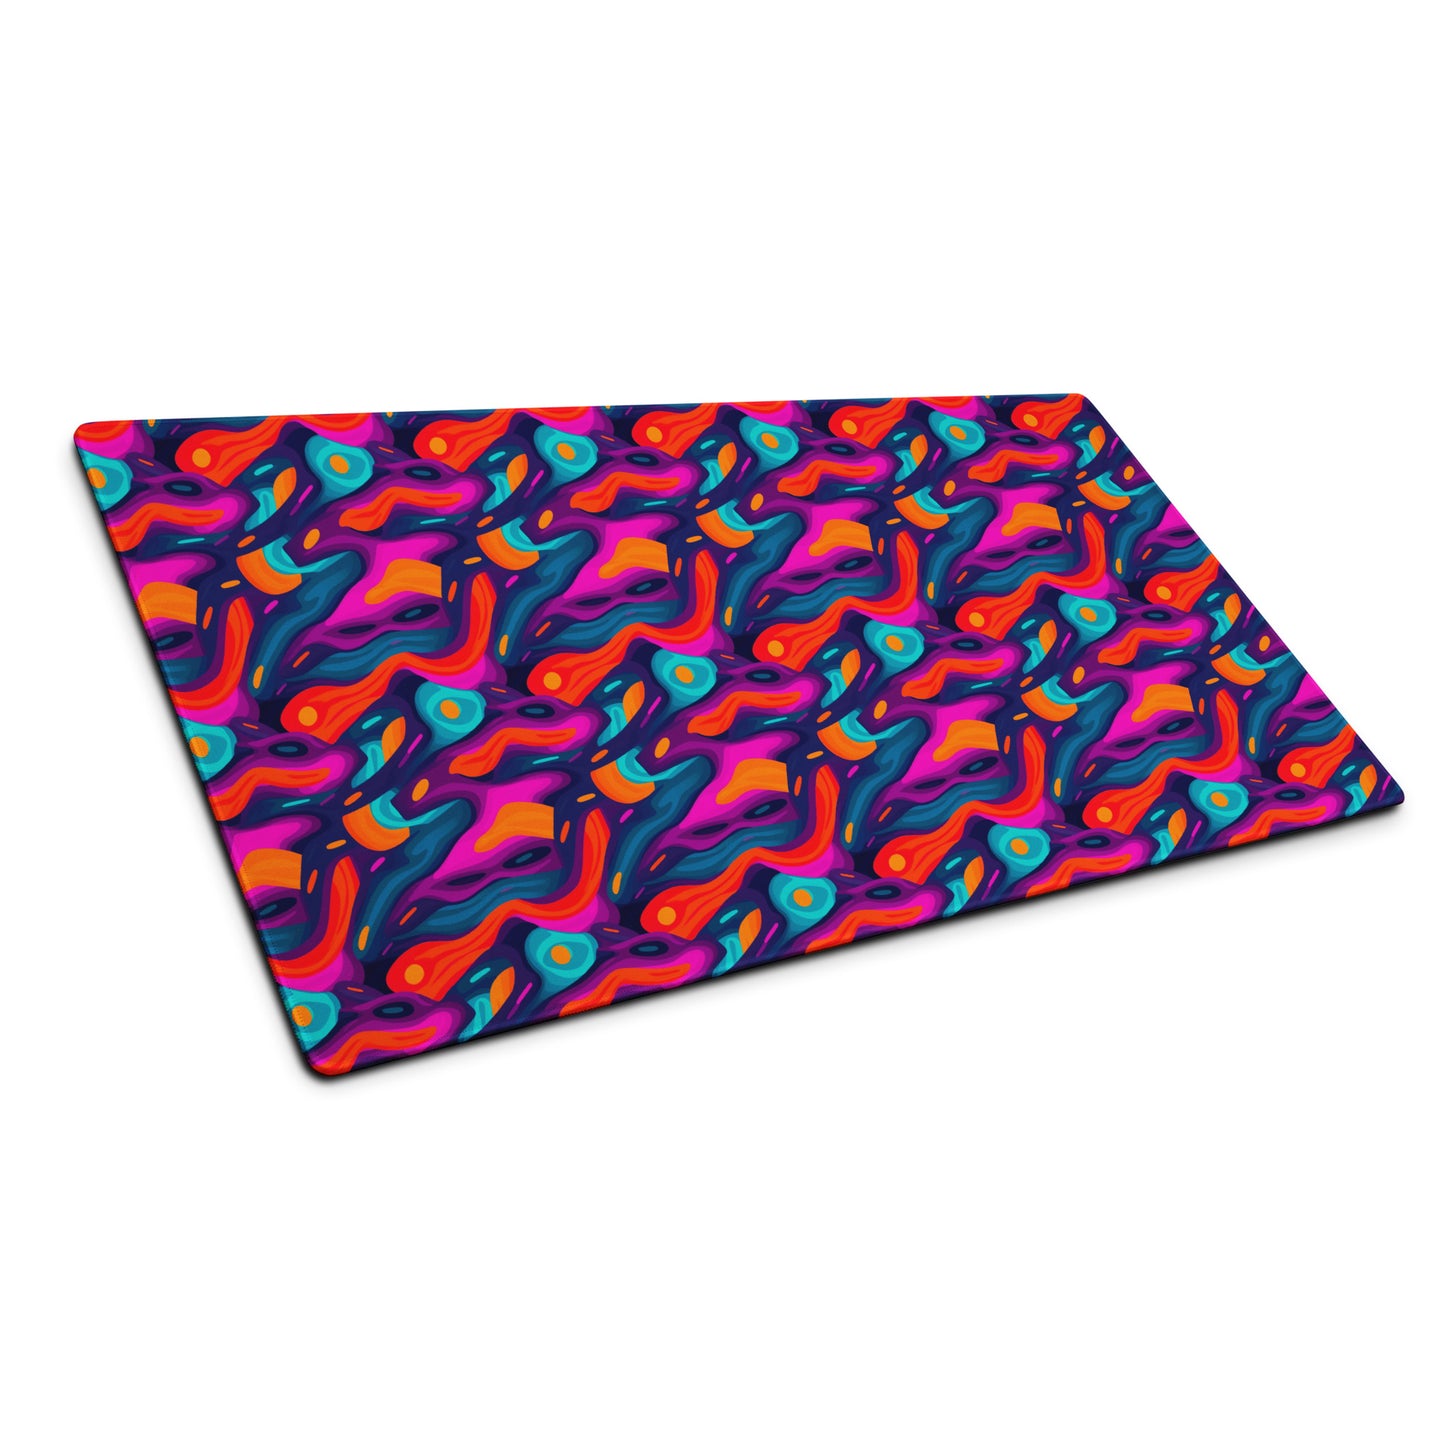 A 36" x 18" desk pad with a wavy abstract pattern on it shown at an angle. Blue, Purple and Red in color.